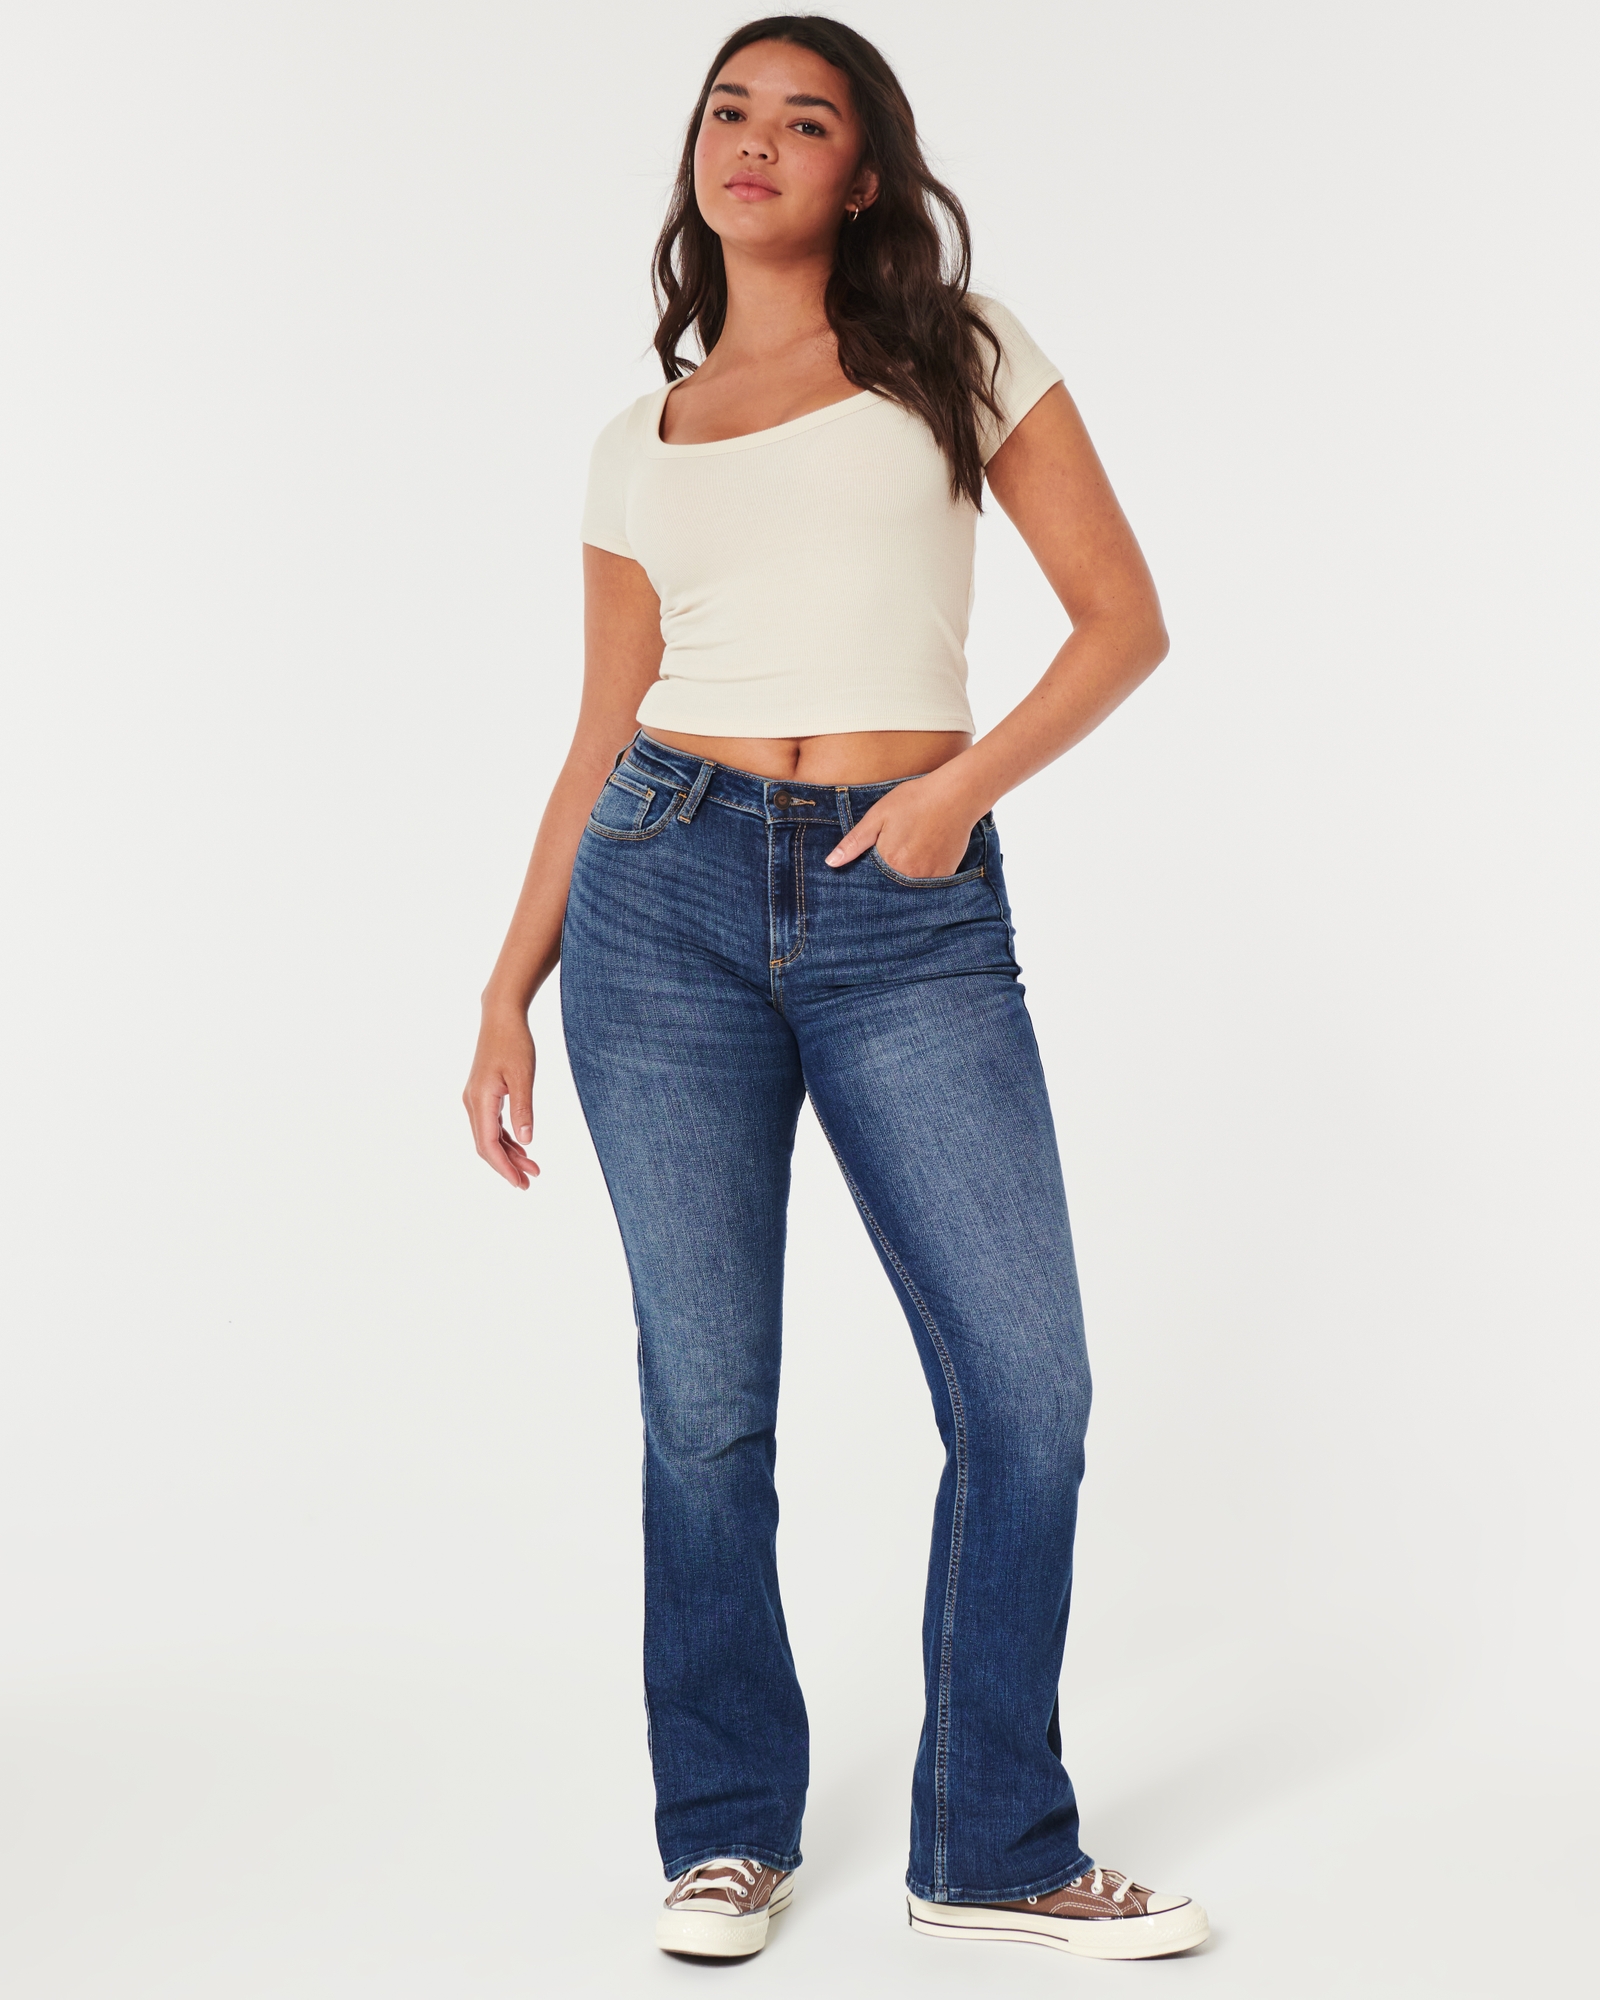 https://img.hollisterco.com/is/image/anf/KIC_355-2329-0732-279_model1.jpg?policy=product-extra-large